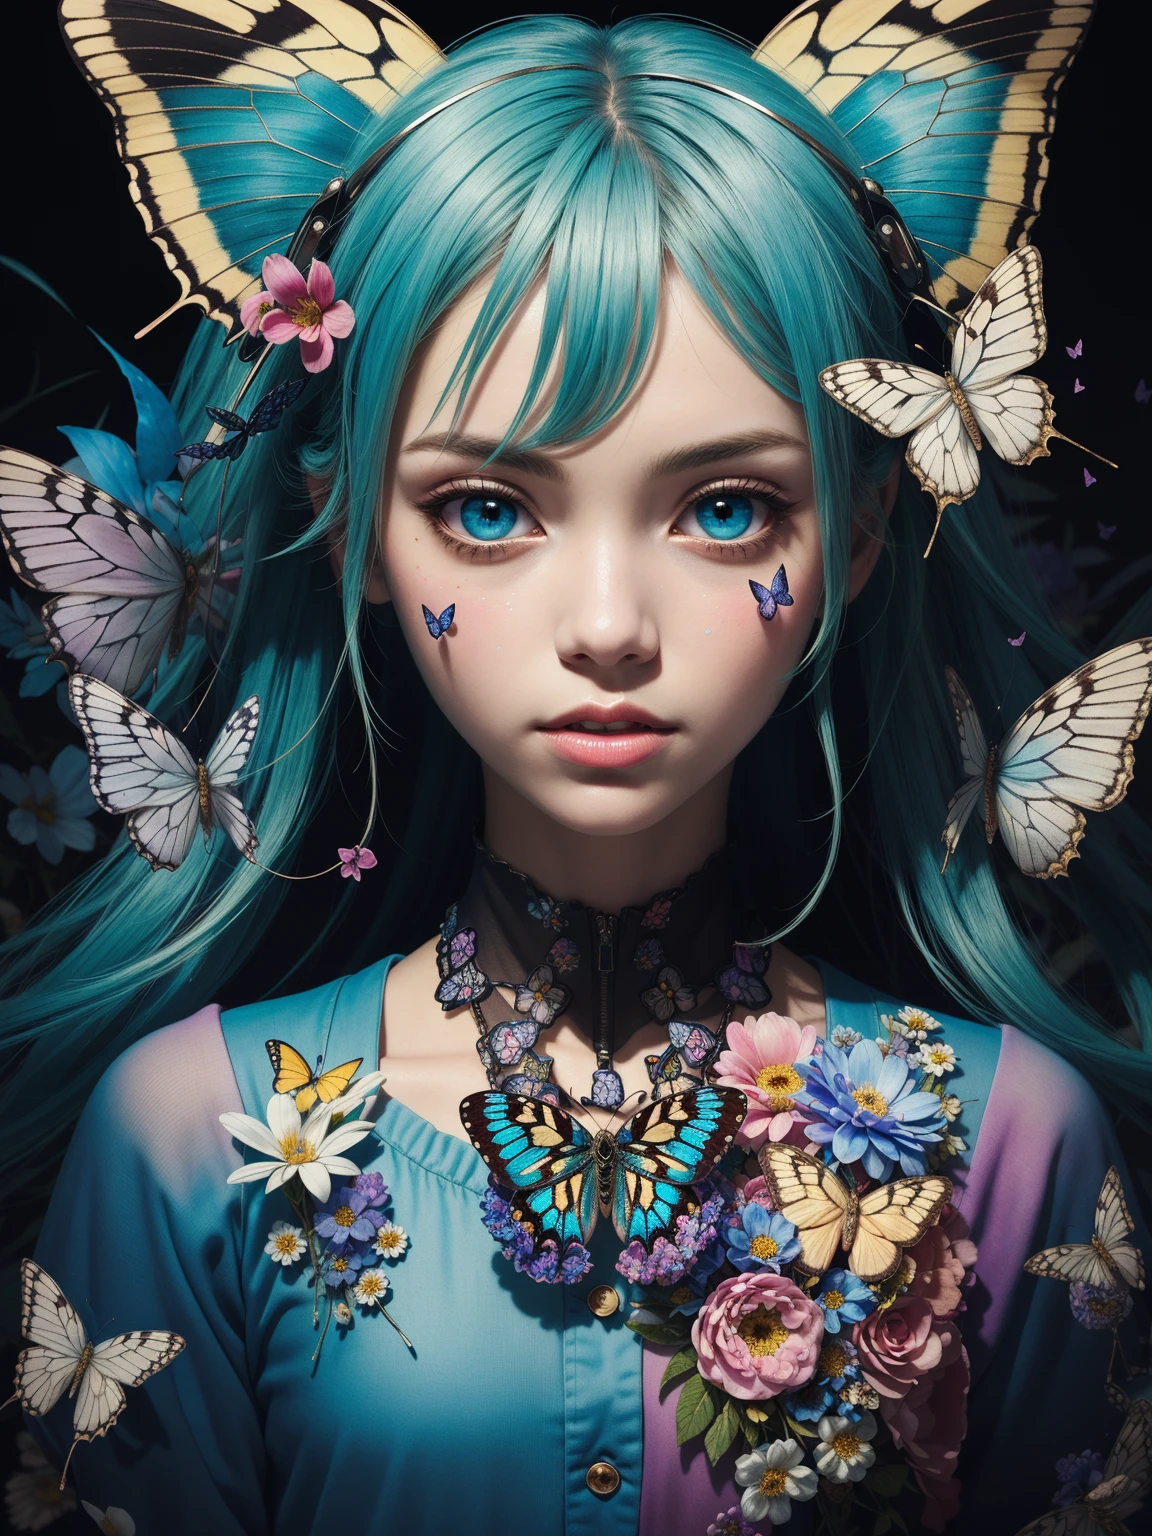 (masterpiece:1.1),(highest quality:1.1),(HDR:1),ambient light,ultra-high quality,( ultra detailed original illustration),(1girl, upper body),((harajuku fashion)),((flowers with human eyes, flower eyes)),double exposure,fusion of fluid abstract art,glitch,(original illustration composition),(fusion of limited color, maximalism artstyle, geometric artstyle, butterflies, junk art),